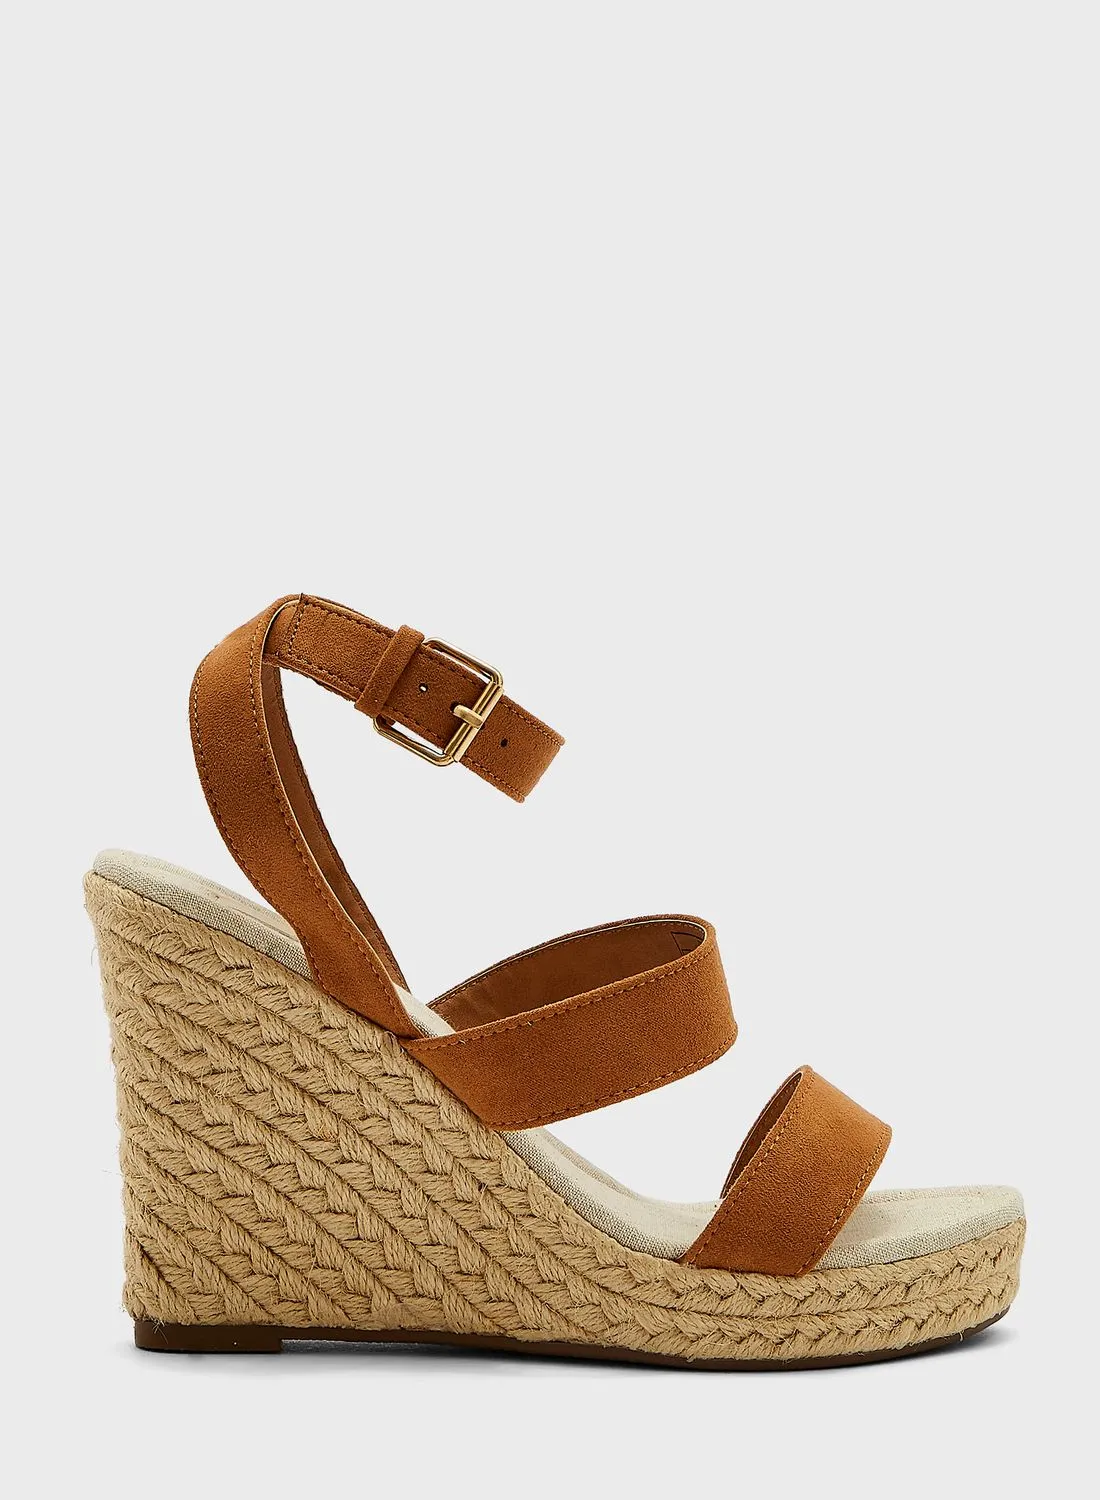 ONLY Amelia-16 Wedge Sandals